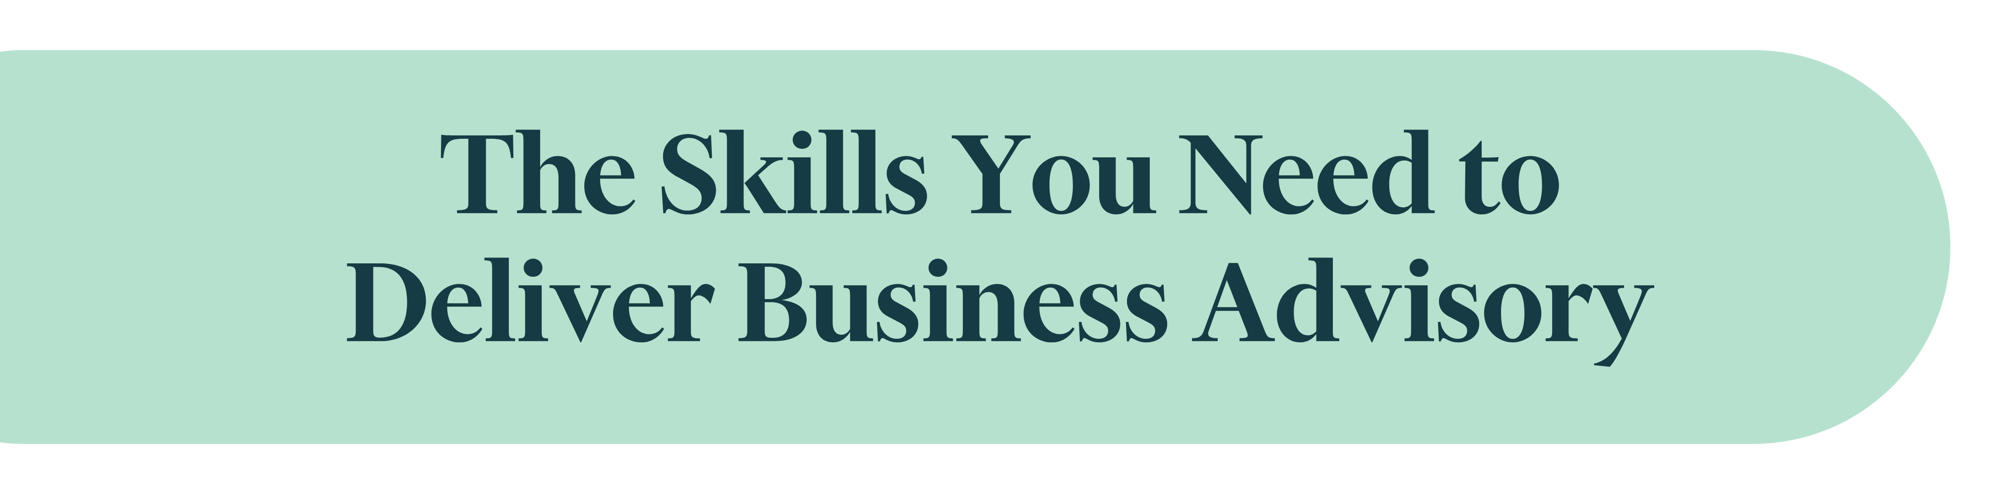 The Skills You Need to Deliver Business Advisory